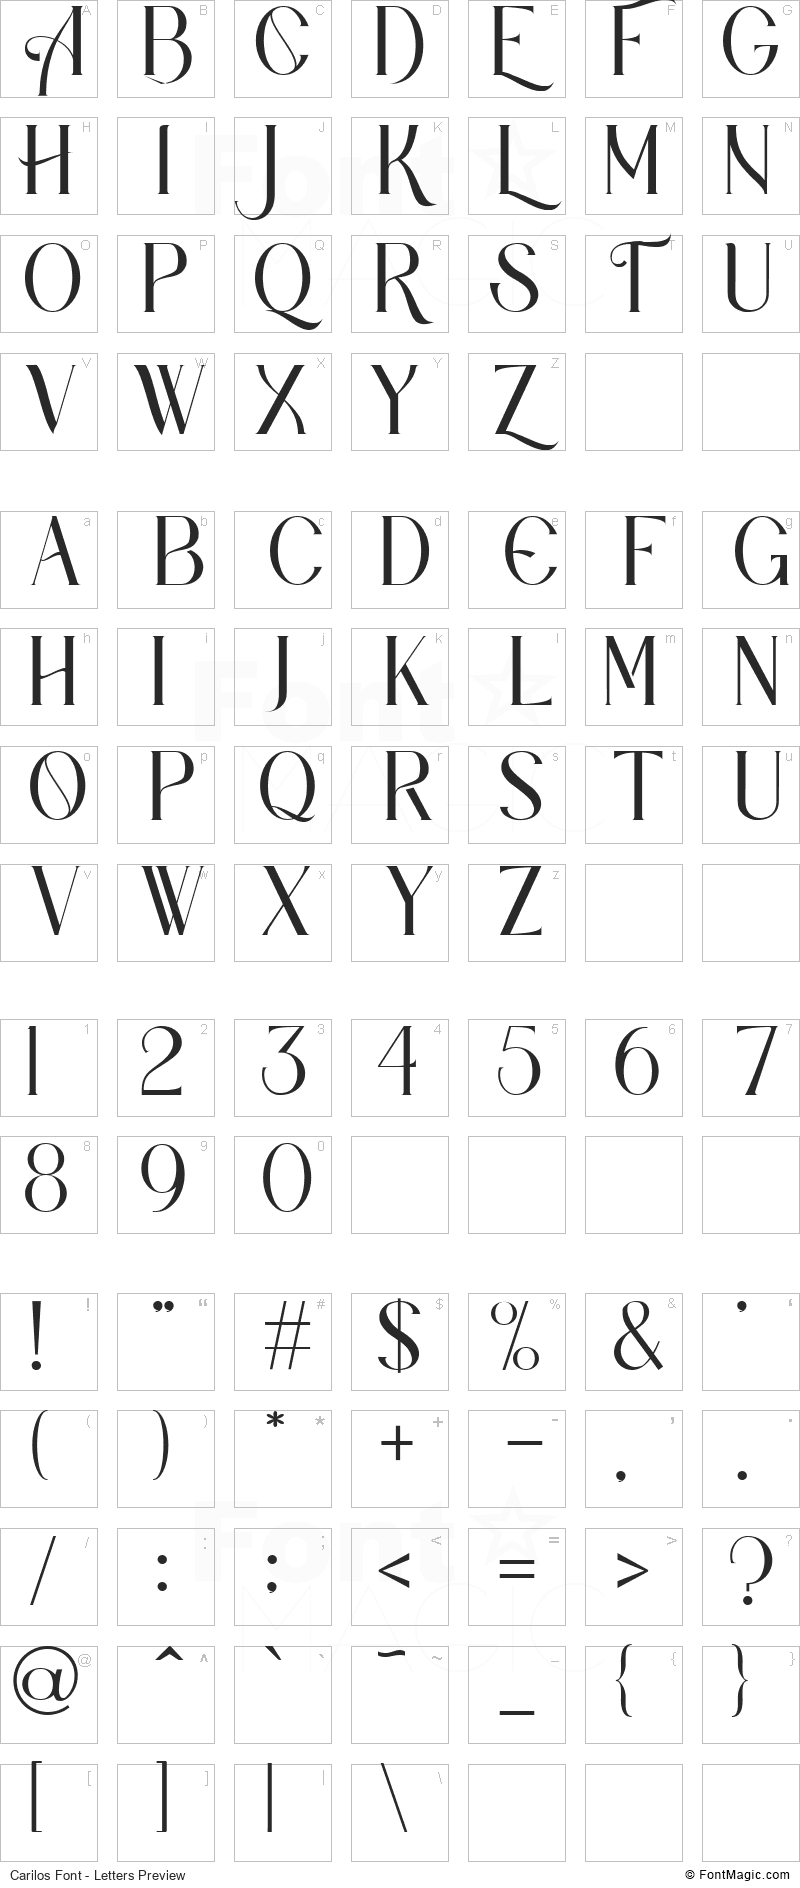 Carilos Font - All Latters Preview Chart